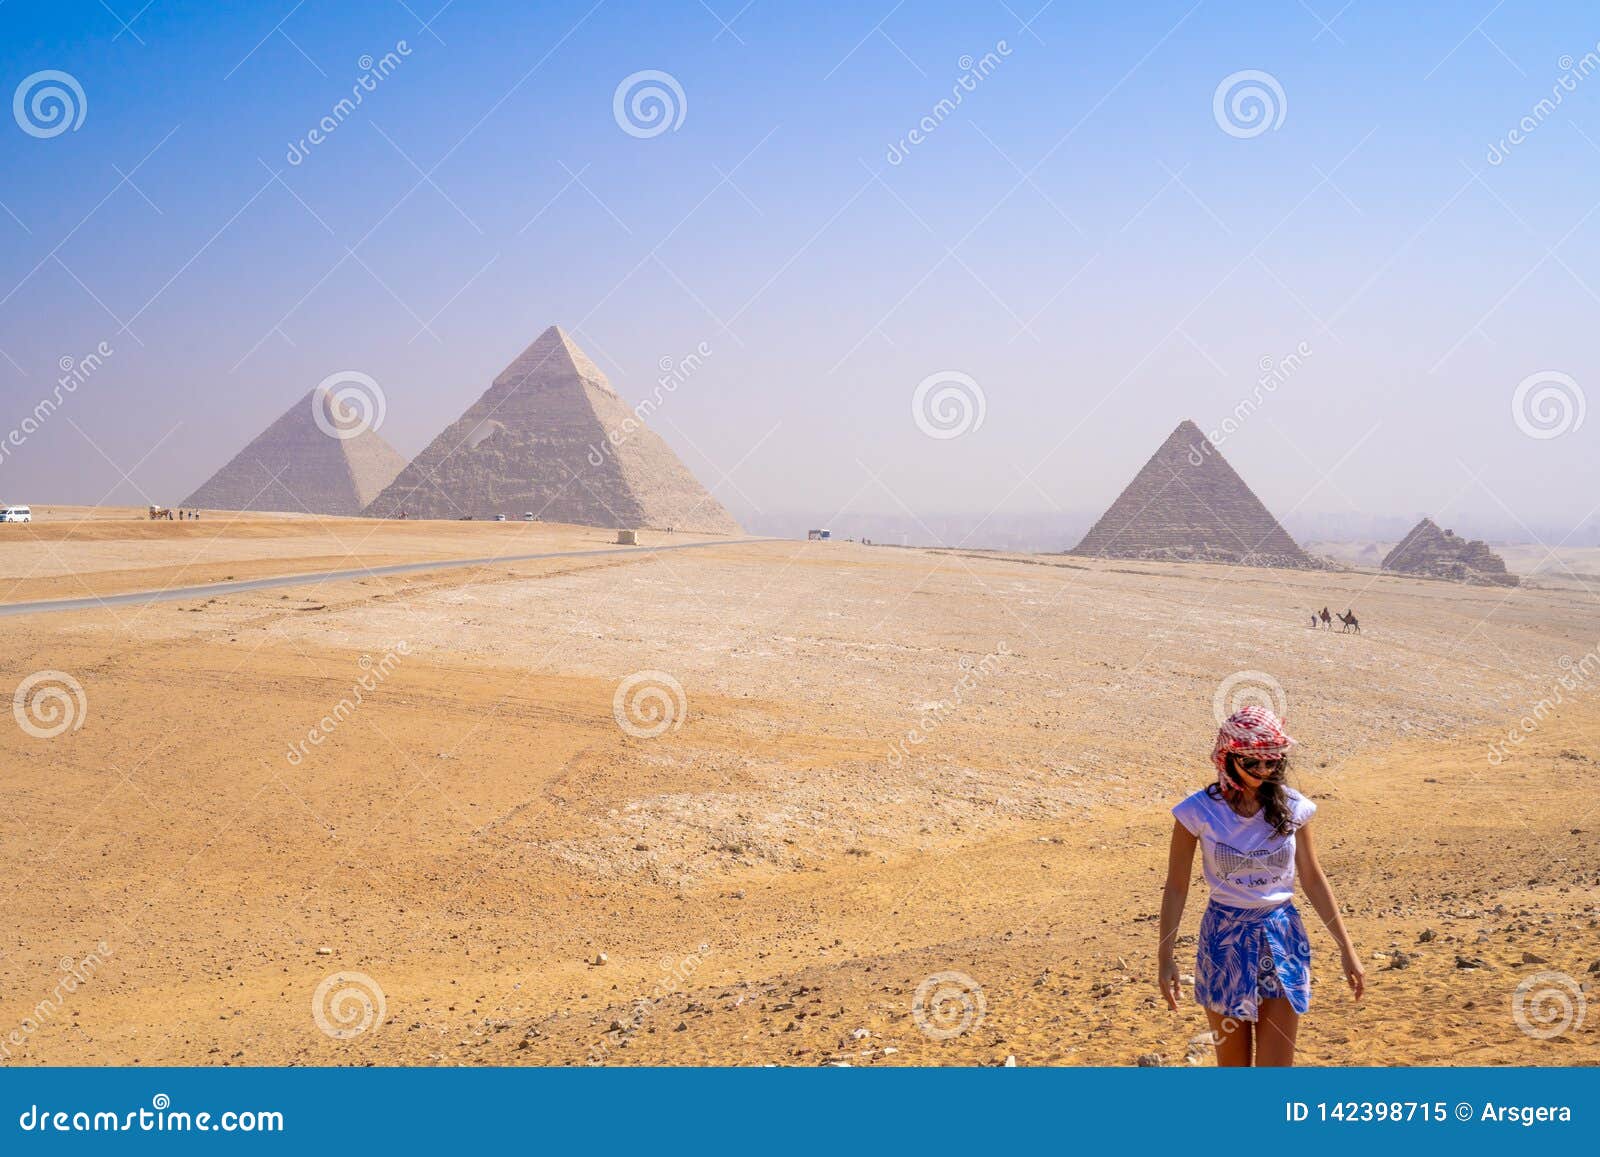 Young Woman Taking Photos With Pyramids Of Giza View Editorial Image 